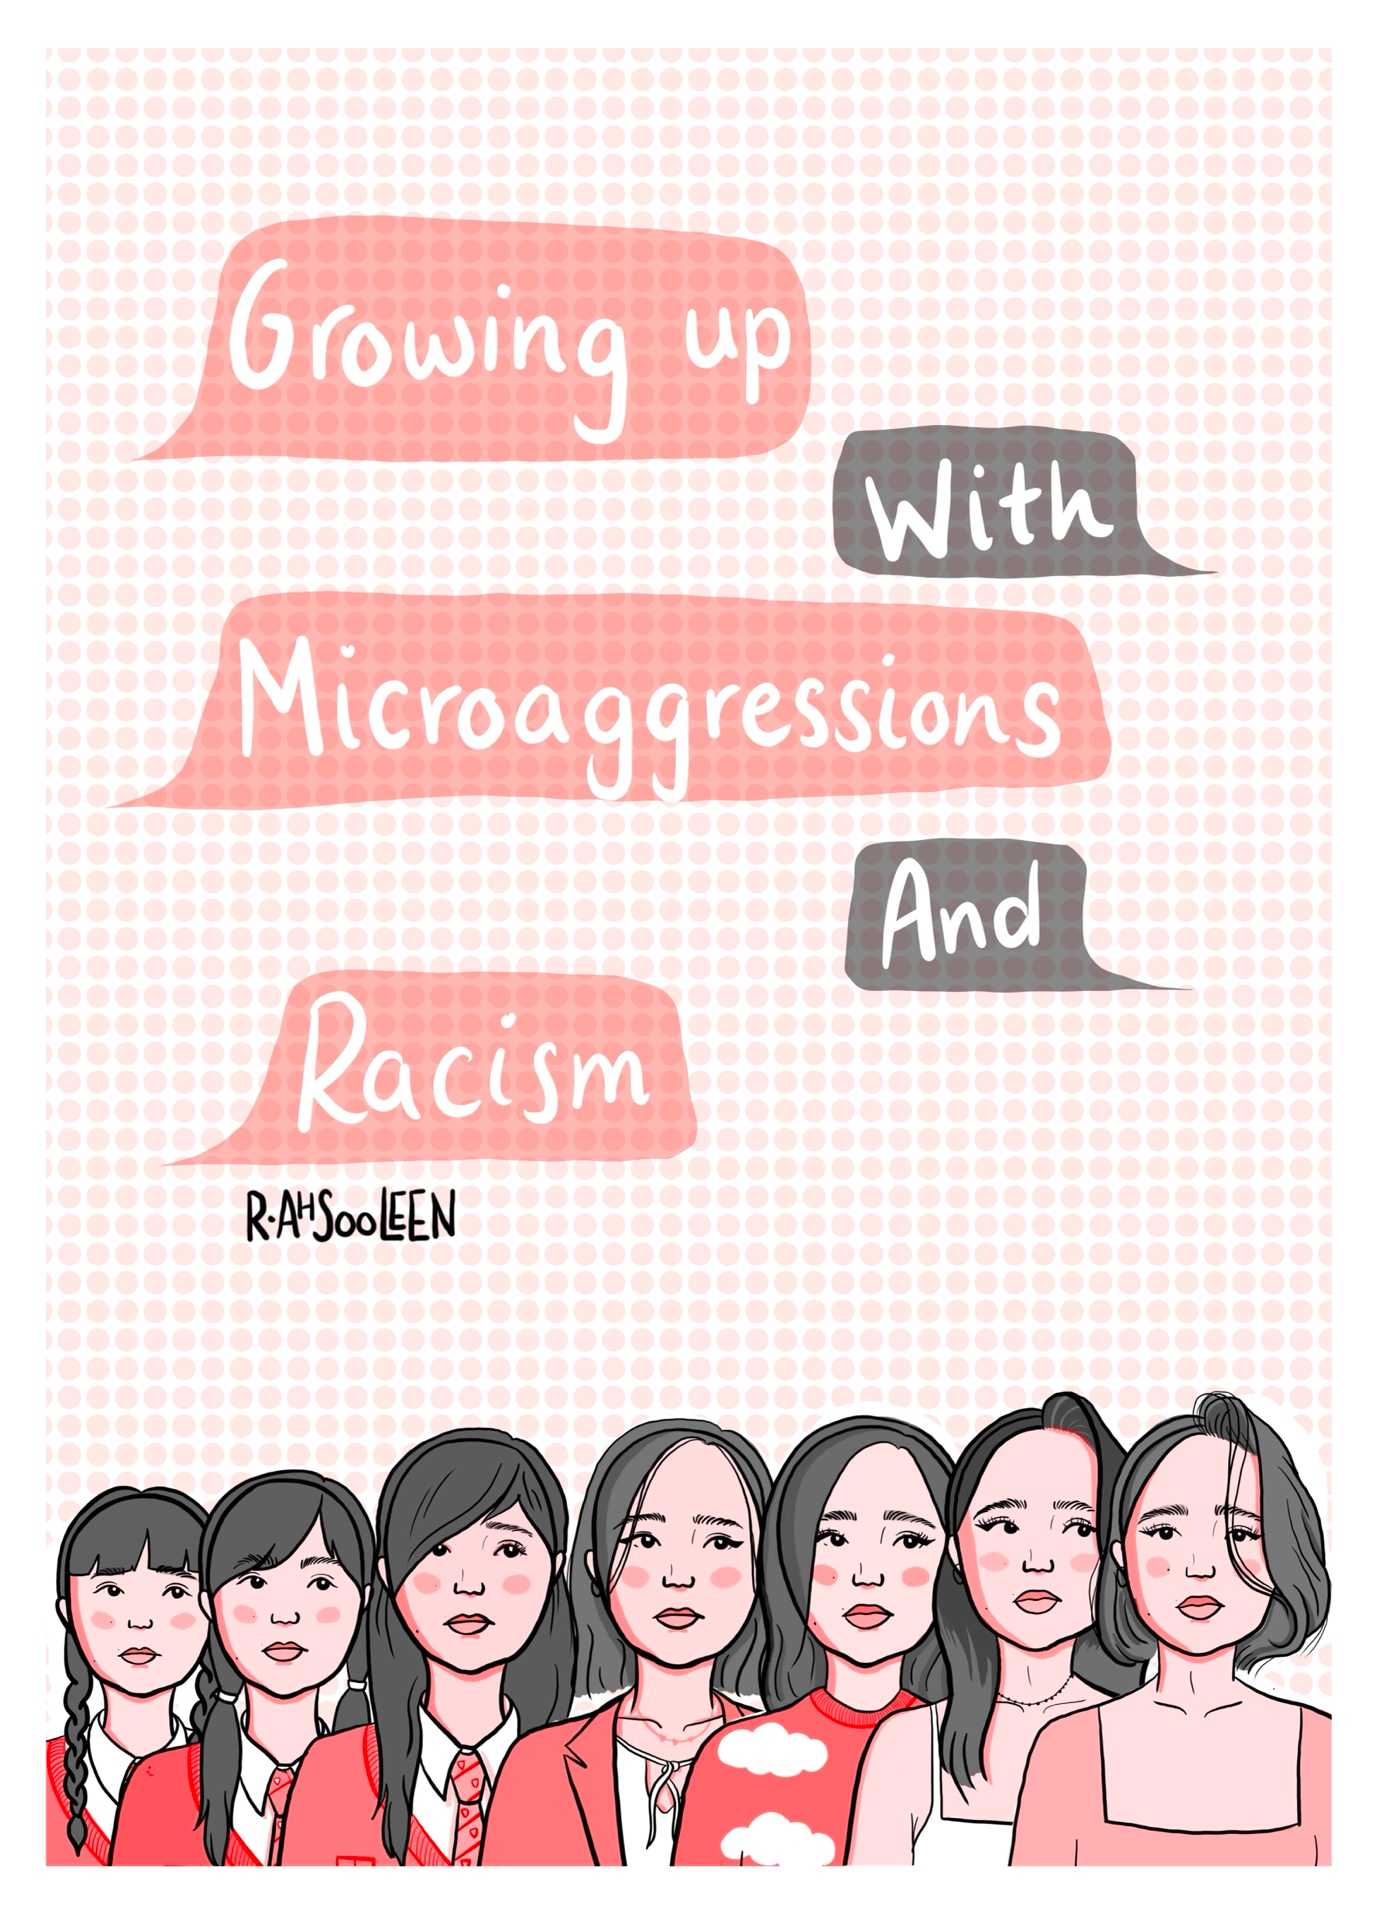 Growing up with Microaggressions and Racism